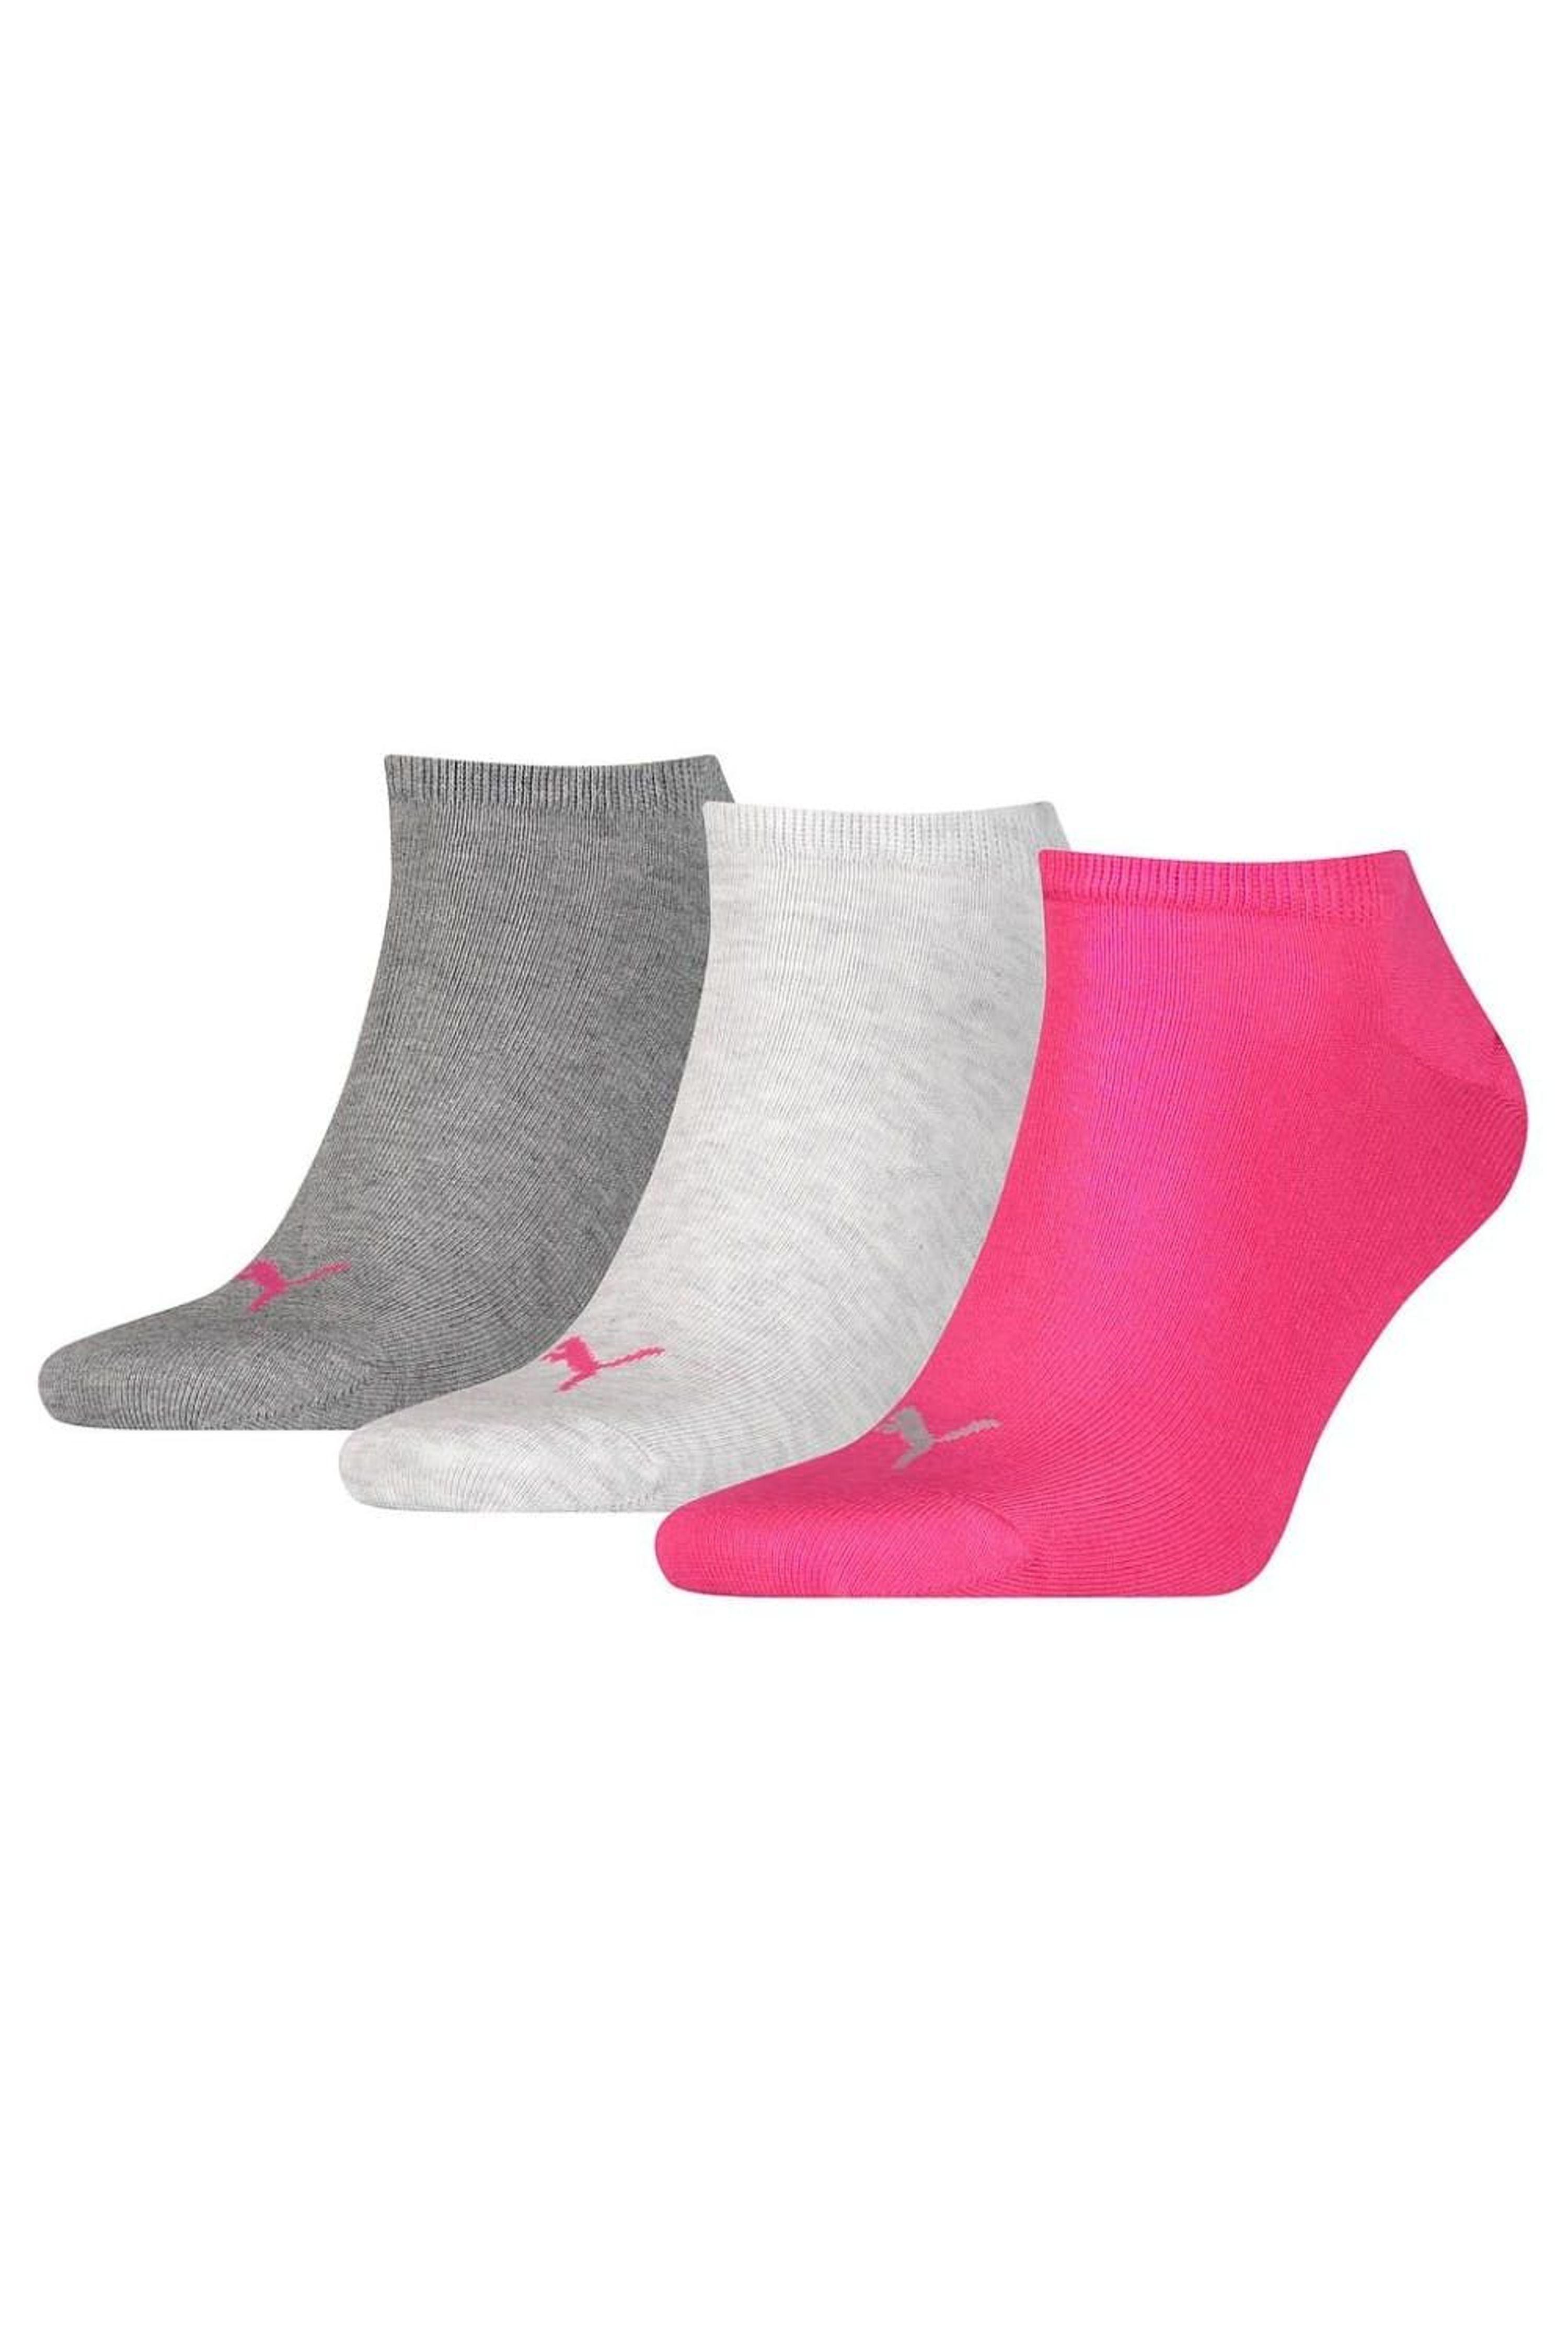 PUMA Adult Invisible Socks in Pink | Lyst